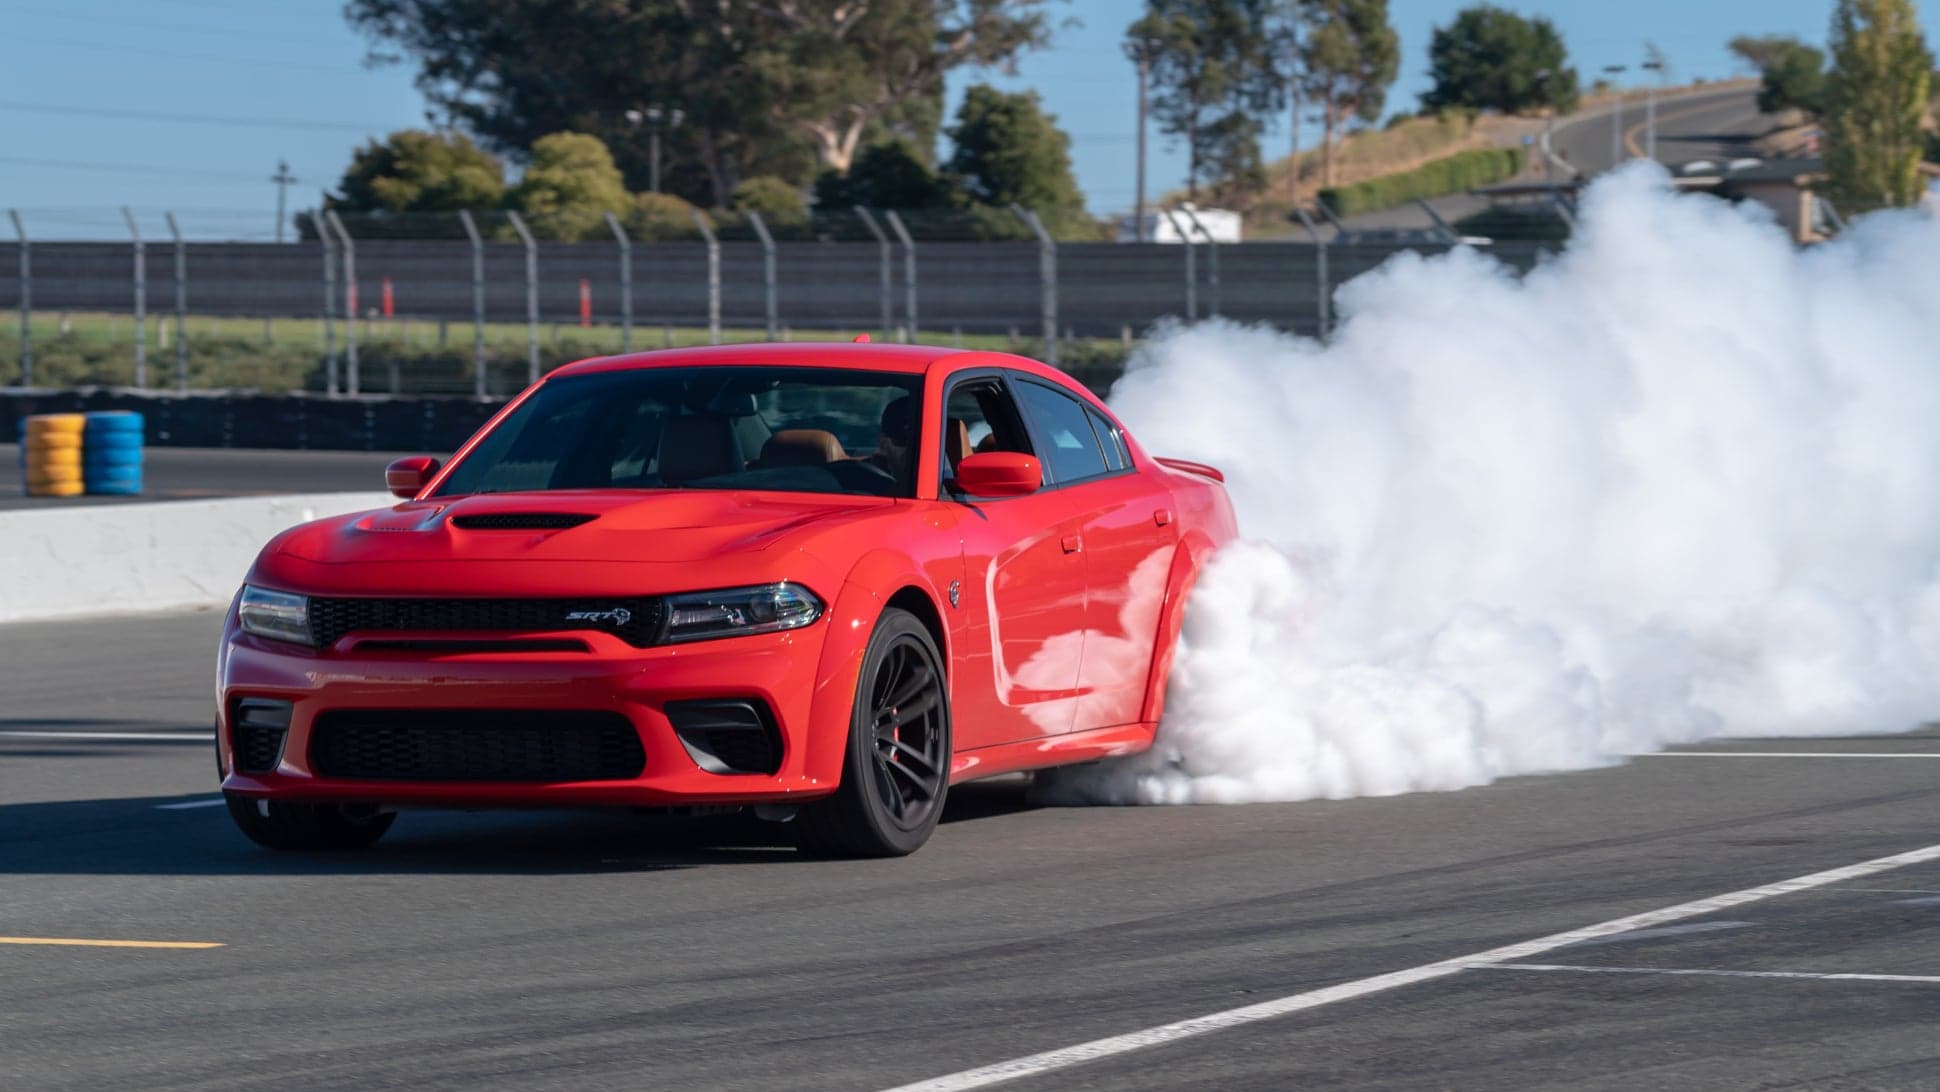 Most Dodge Hellcat Owners Have At Least Three Cars